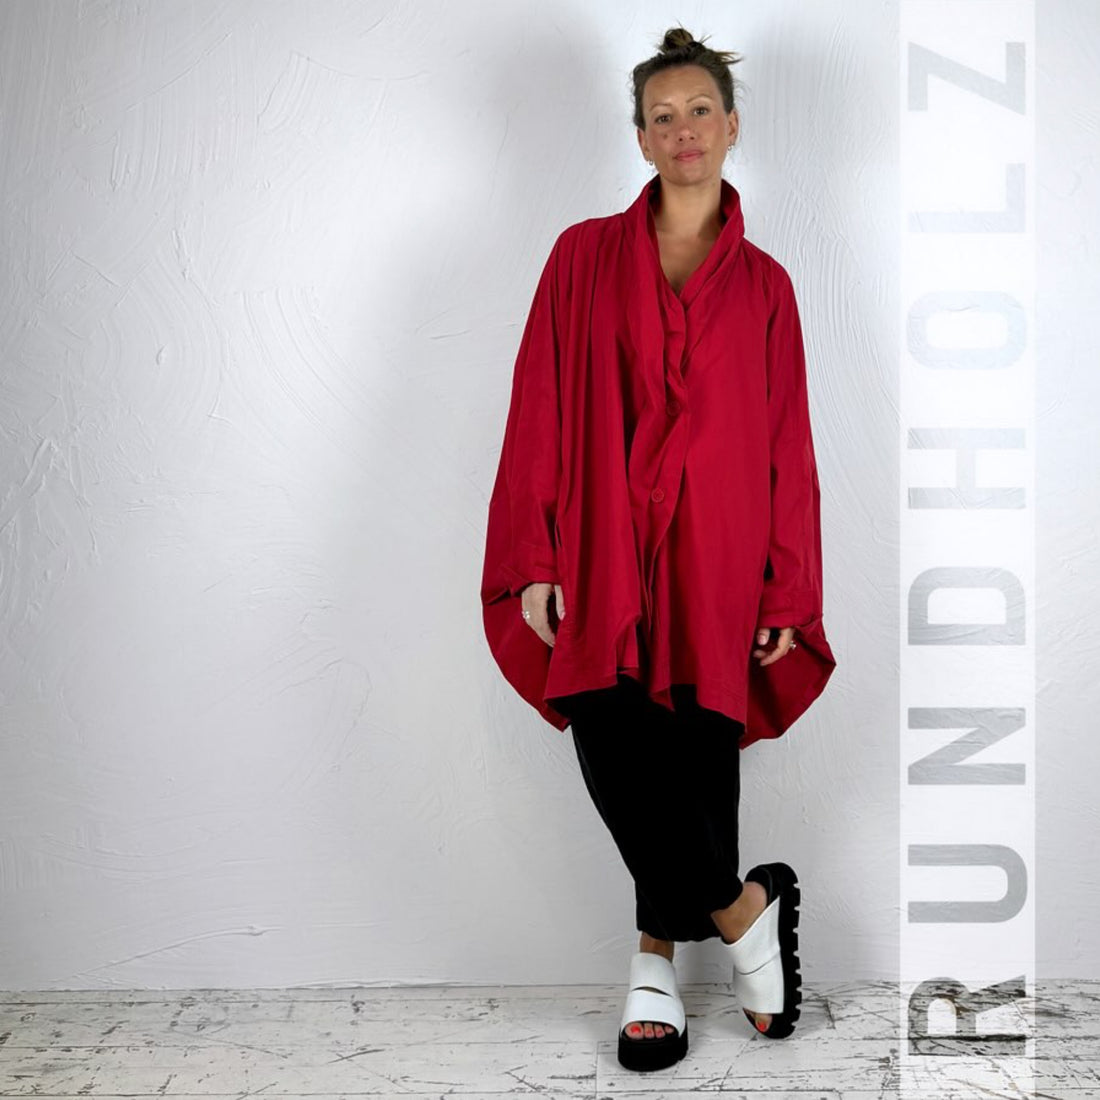 Rundholz Black Label womens clothing in stock at Blue UK